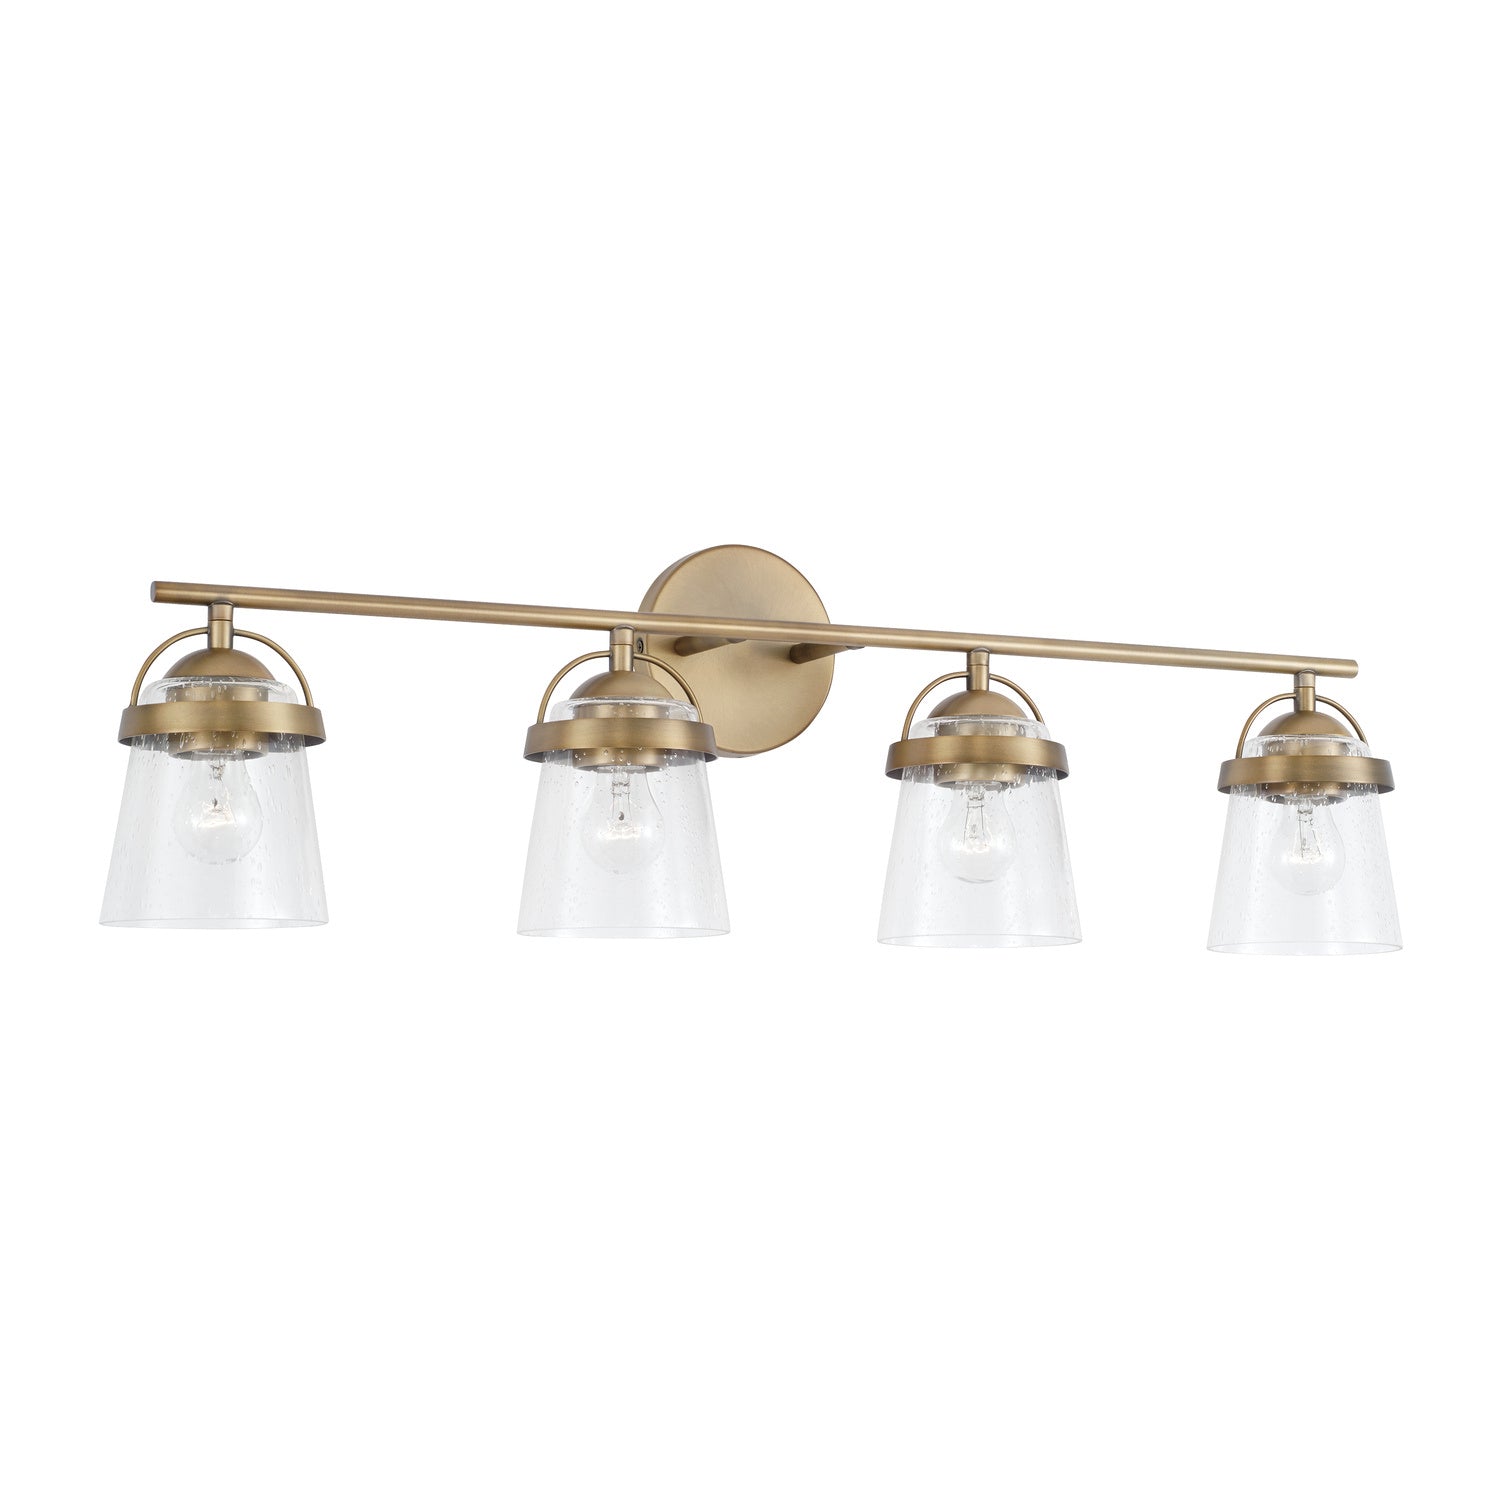 Capital Madison 147041AD-534 Bath Vanity Light 33 in. wide - Aged Brass